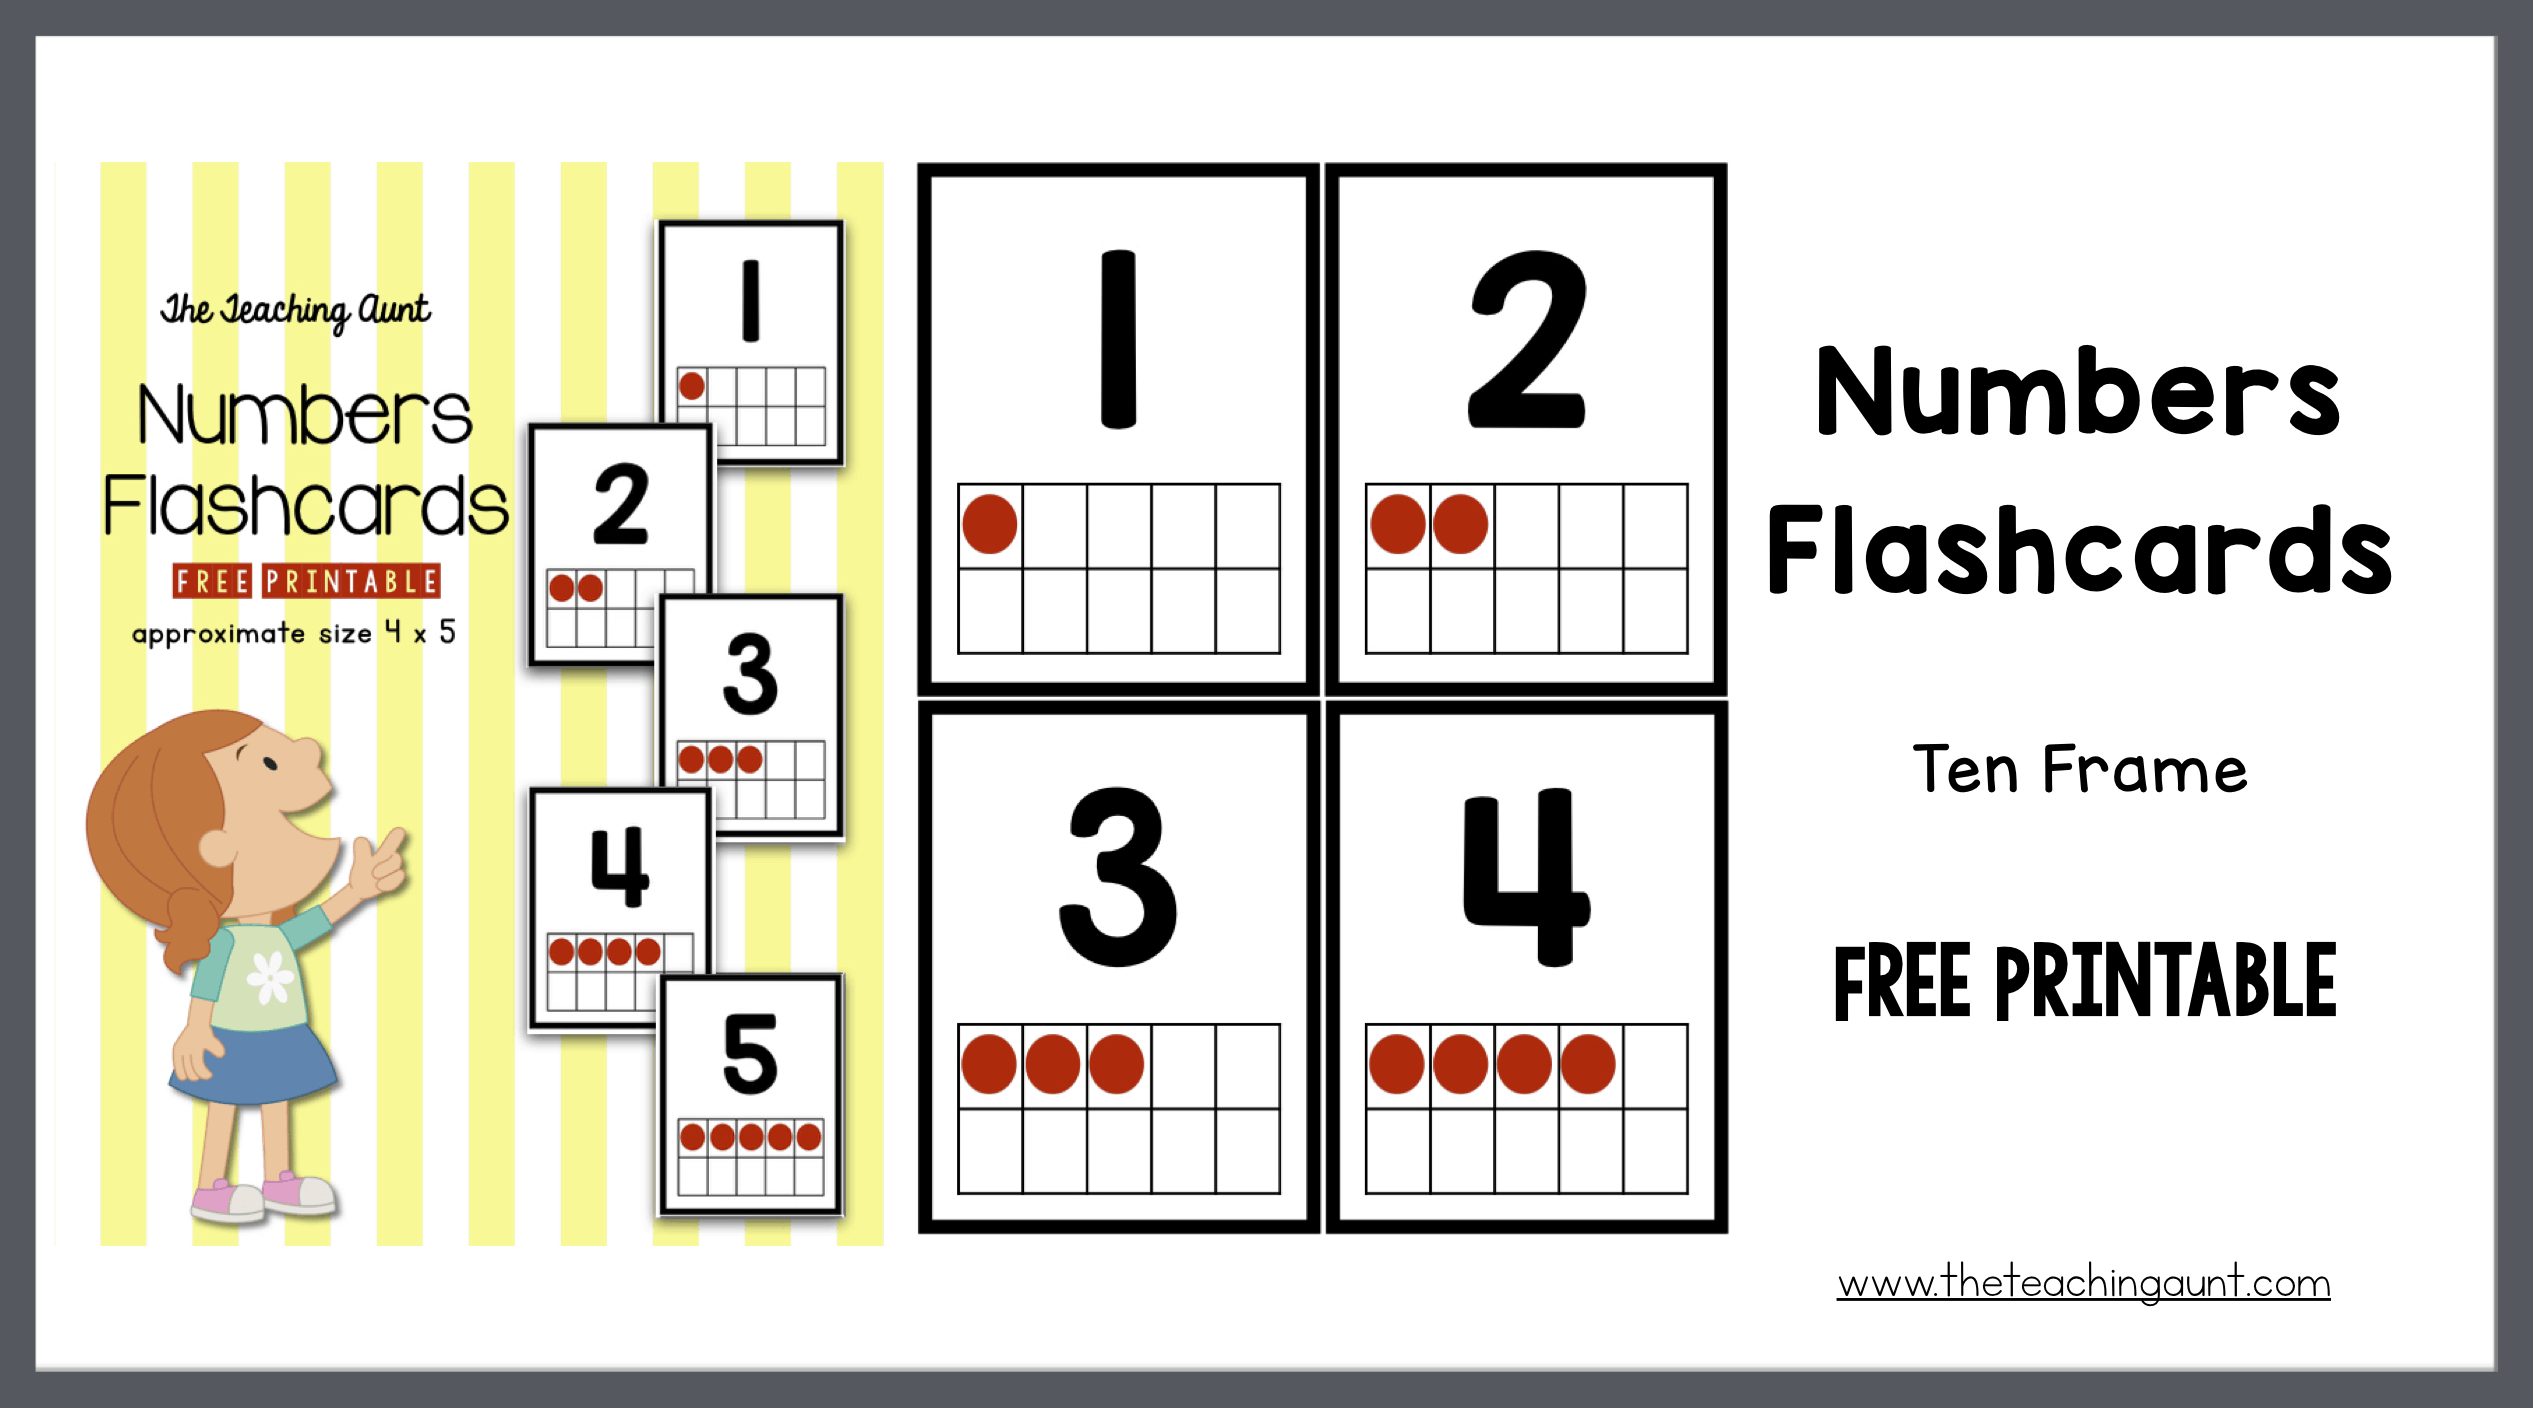 Numbers Flashcards Ten Frame